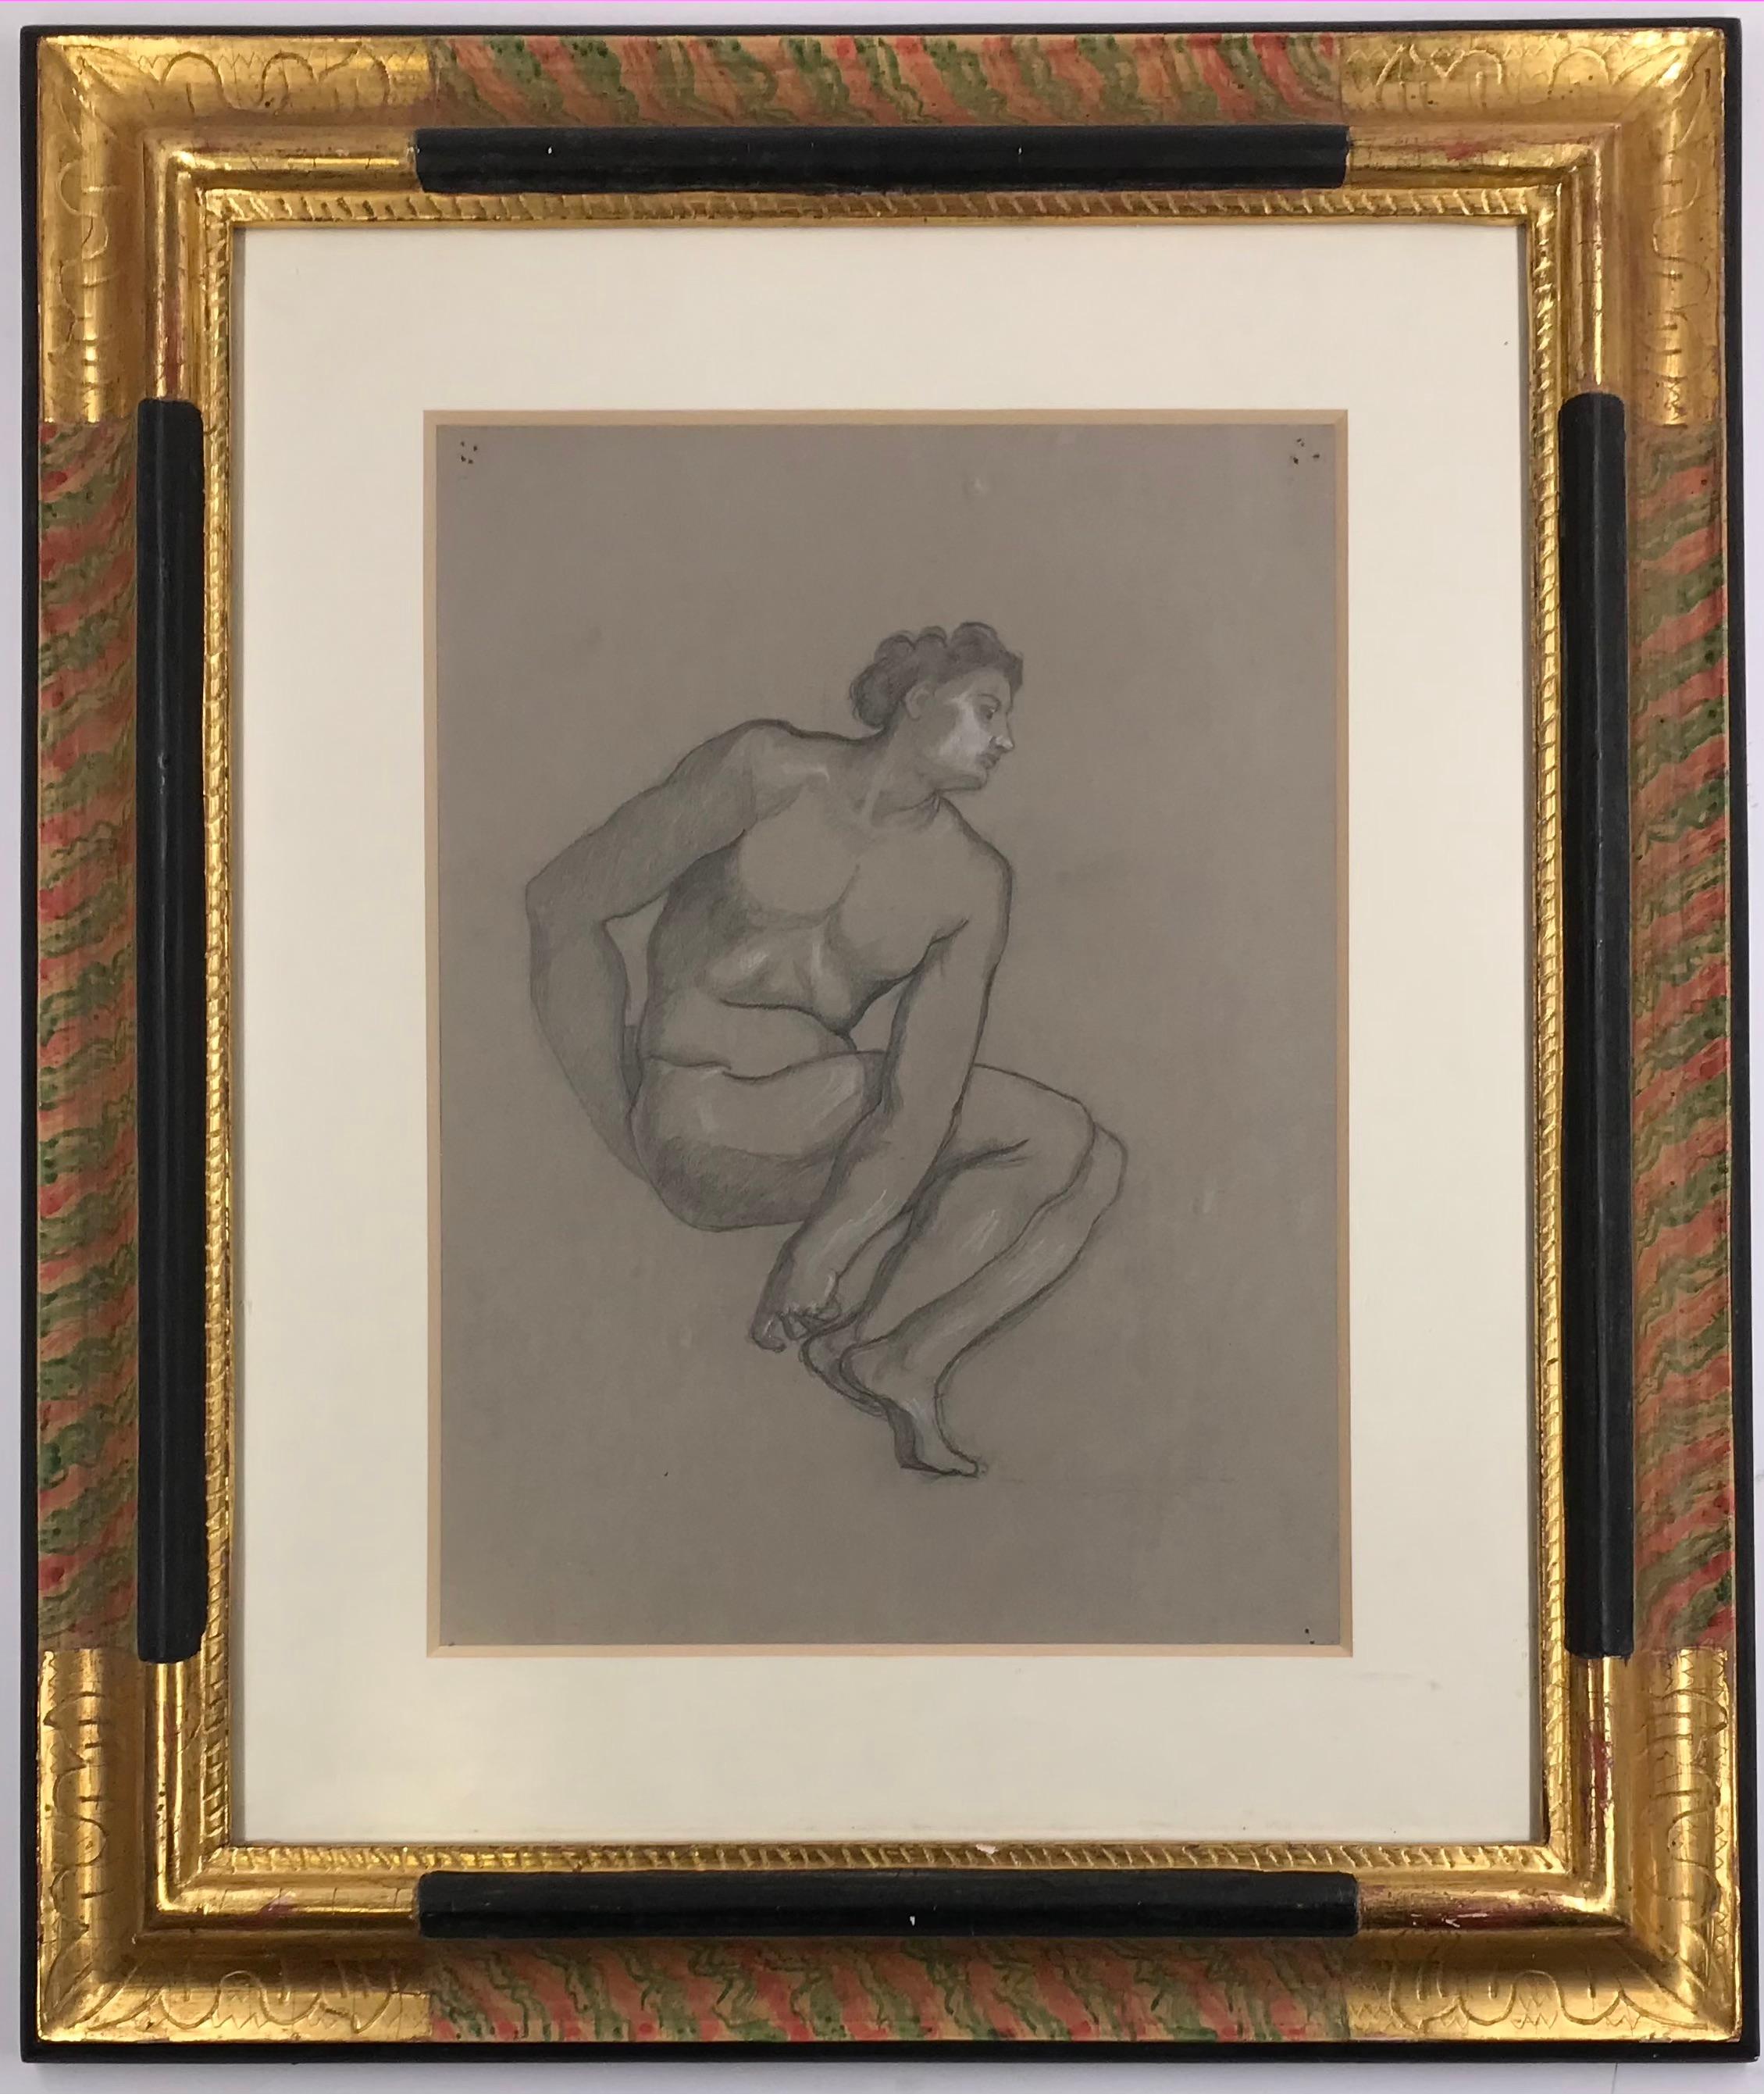 Male Nude - Original Pencil and White Lead on Paper by L. Russolo - 1920s - Art by Luigi Russolo